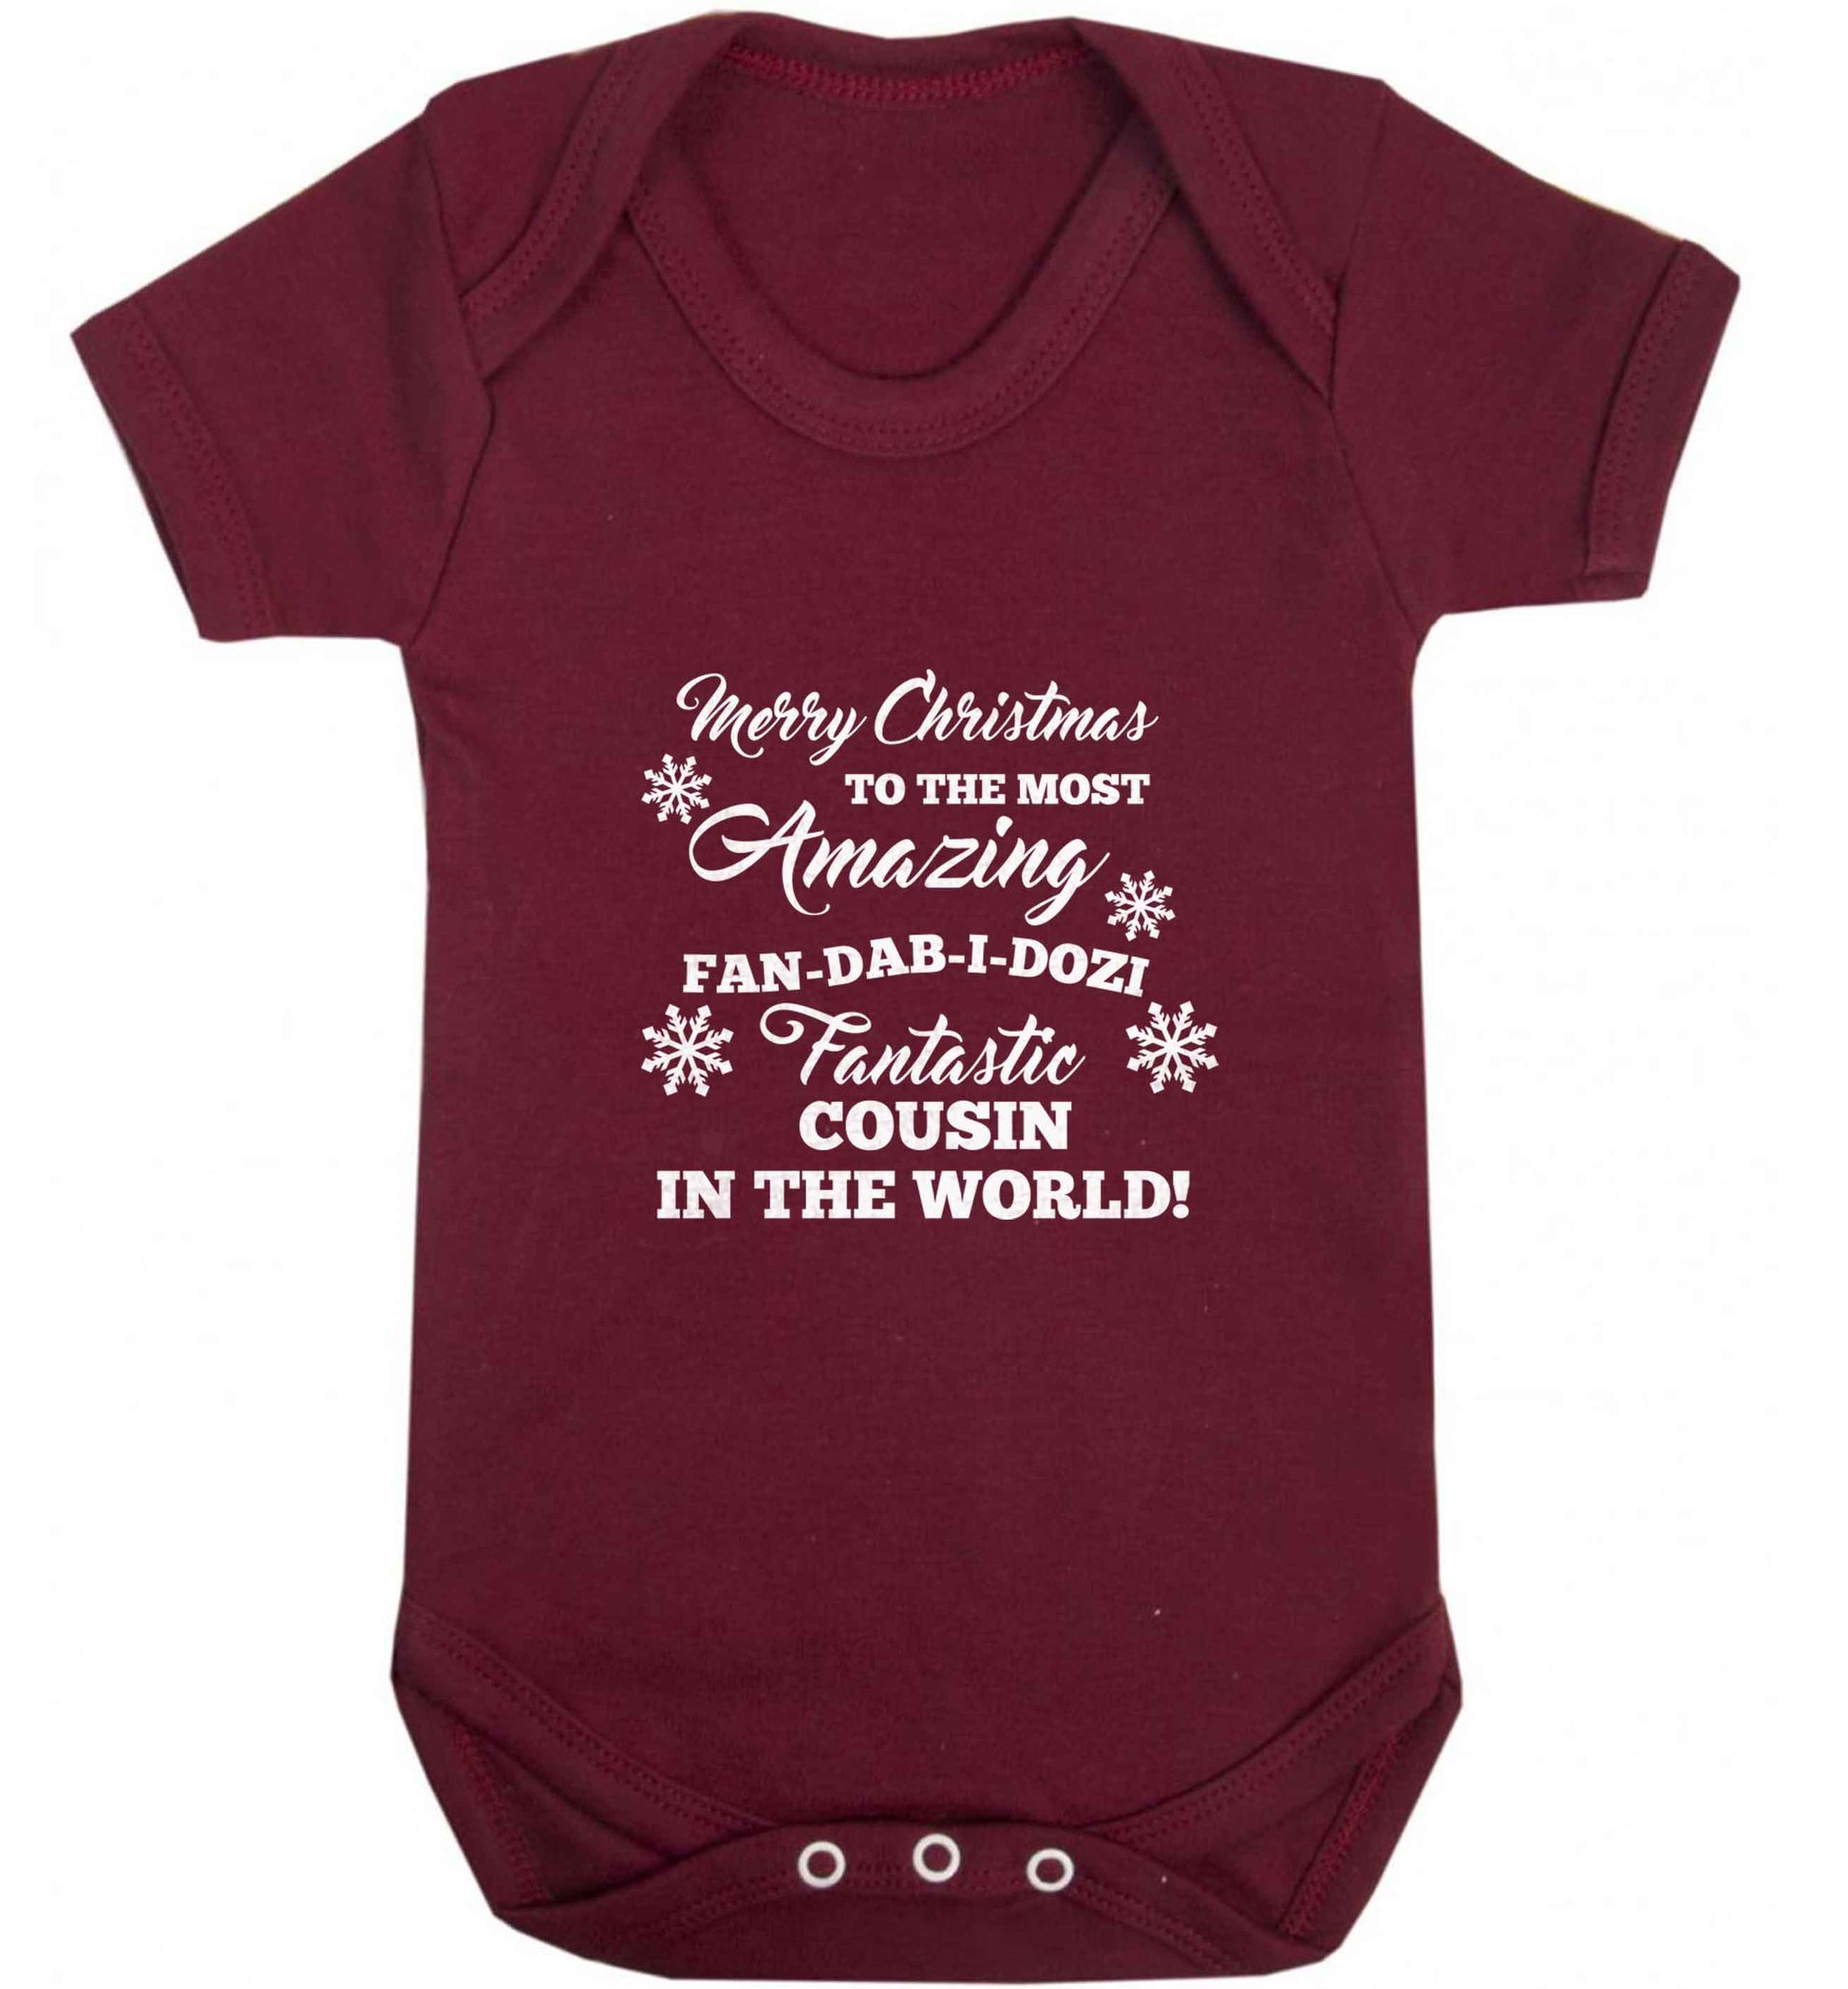 Merry Christmas to the most amazing fan-dab-i-dozi fantasic Cousin in the world baby vest maroon 18-24 months